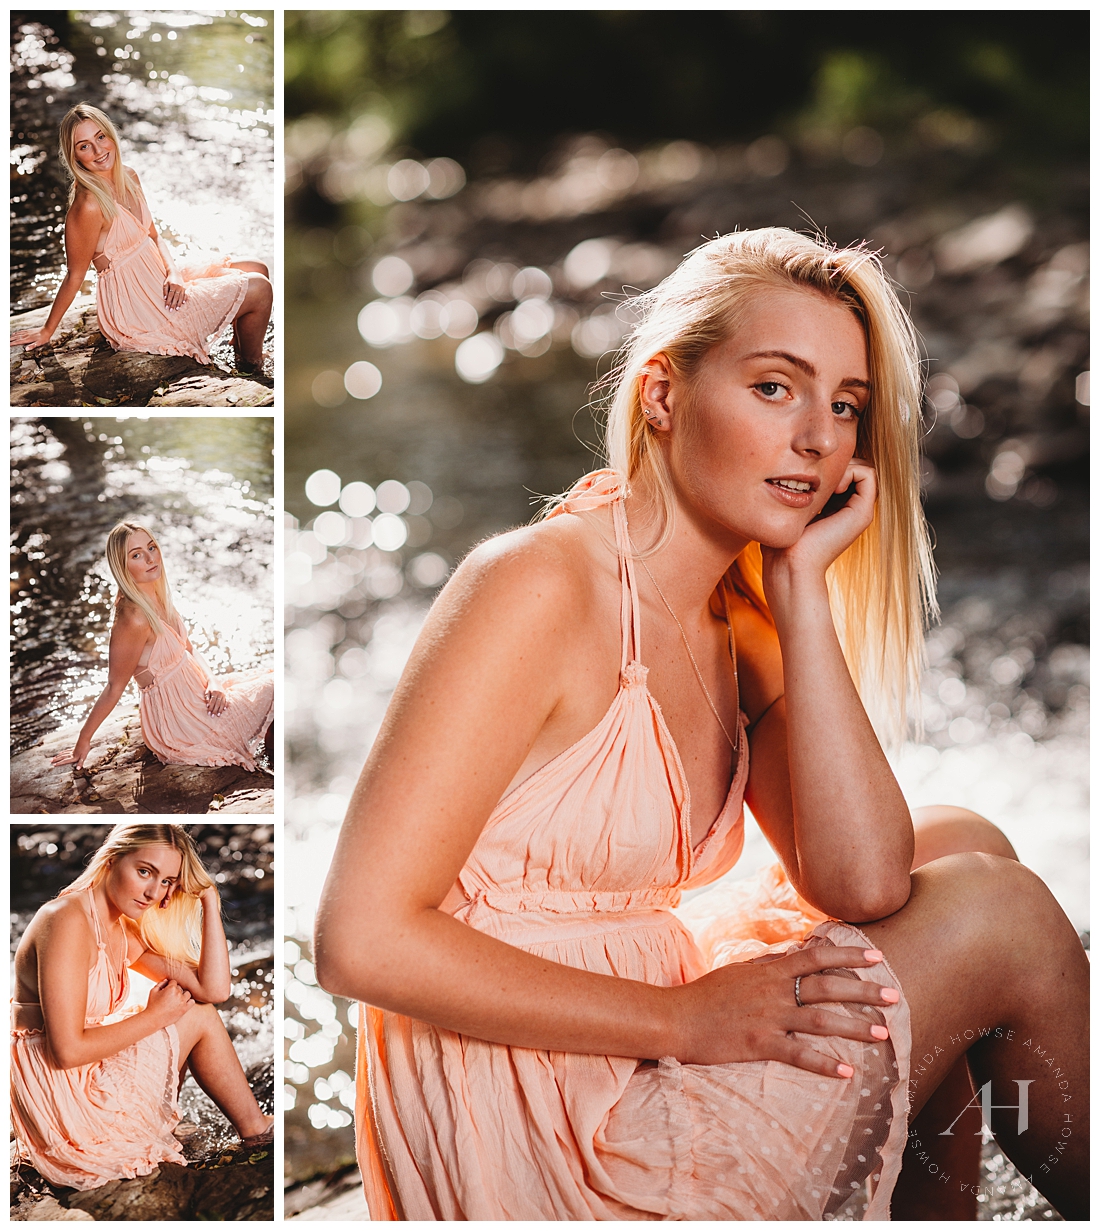 High School Senior Portraits in a River | Photographed by Tacoma's Best Senior Photographer Amanda Howse